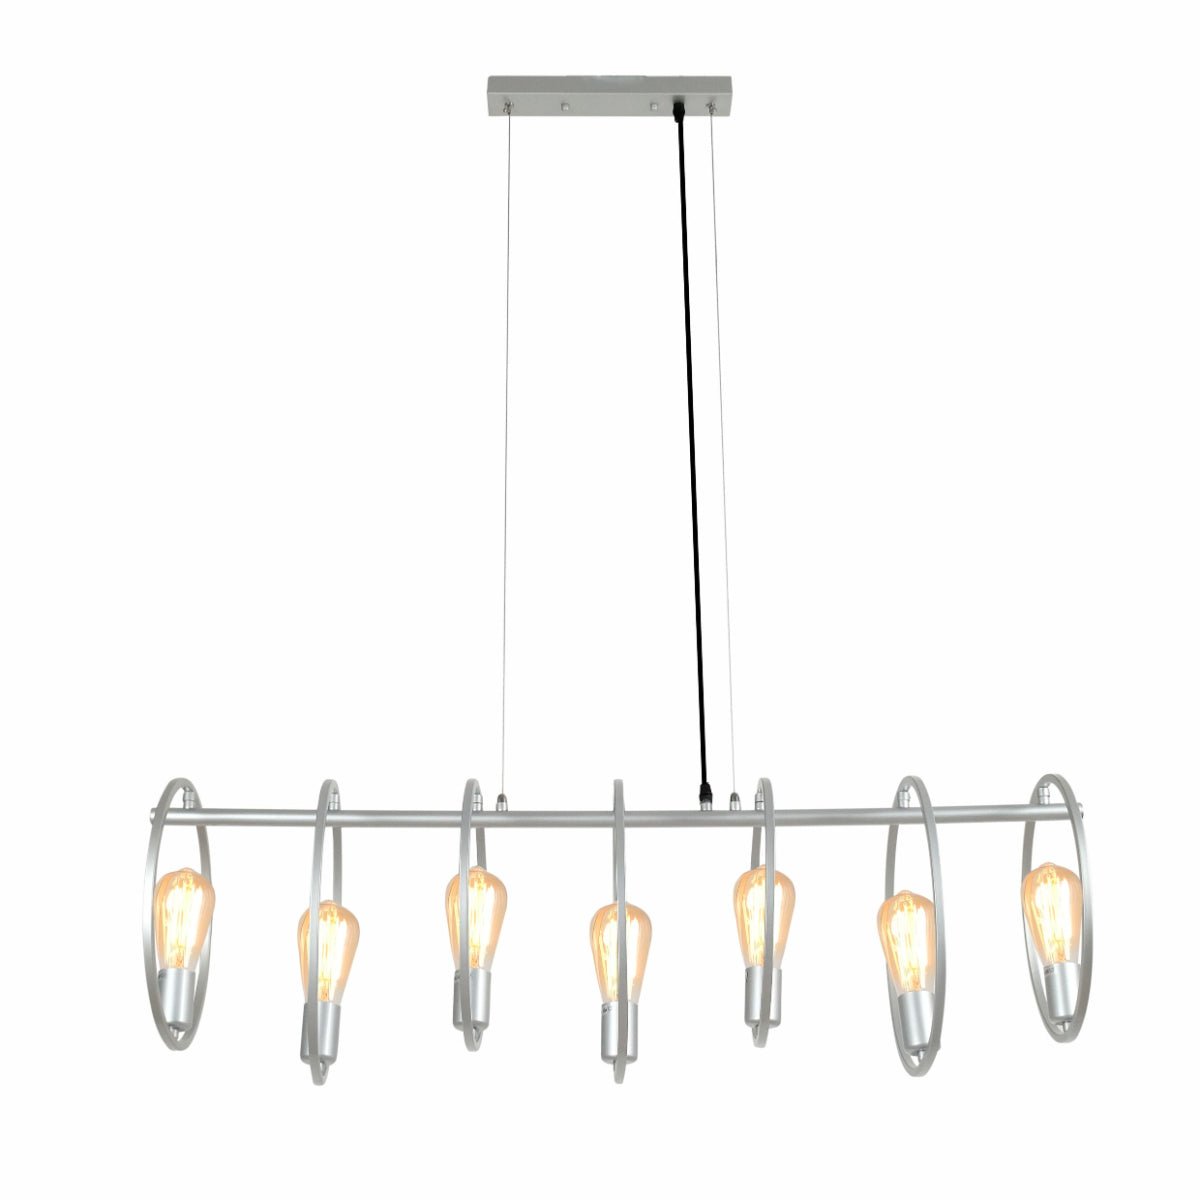 Main image of Circle Caged Silver Grey Kitchen Island Chandelier Ceiling Light with 7xE27 Fittings | TEKLED 159-17502